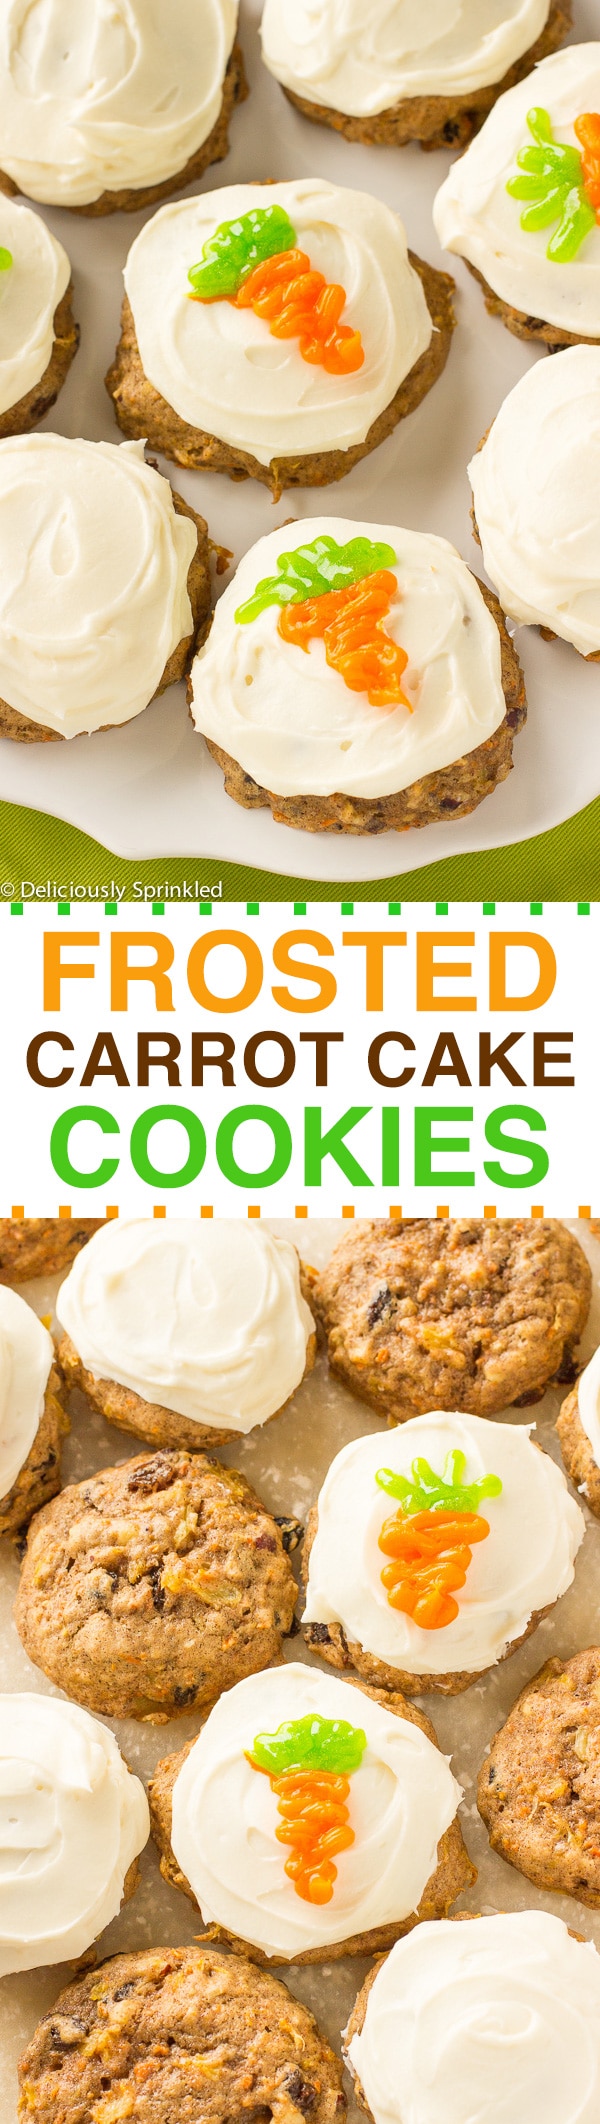 FROSTED CARROT CAKE COOKIES